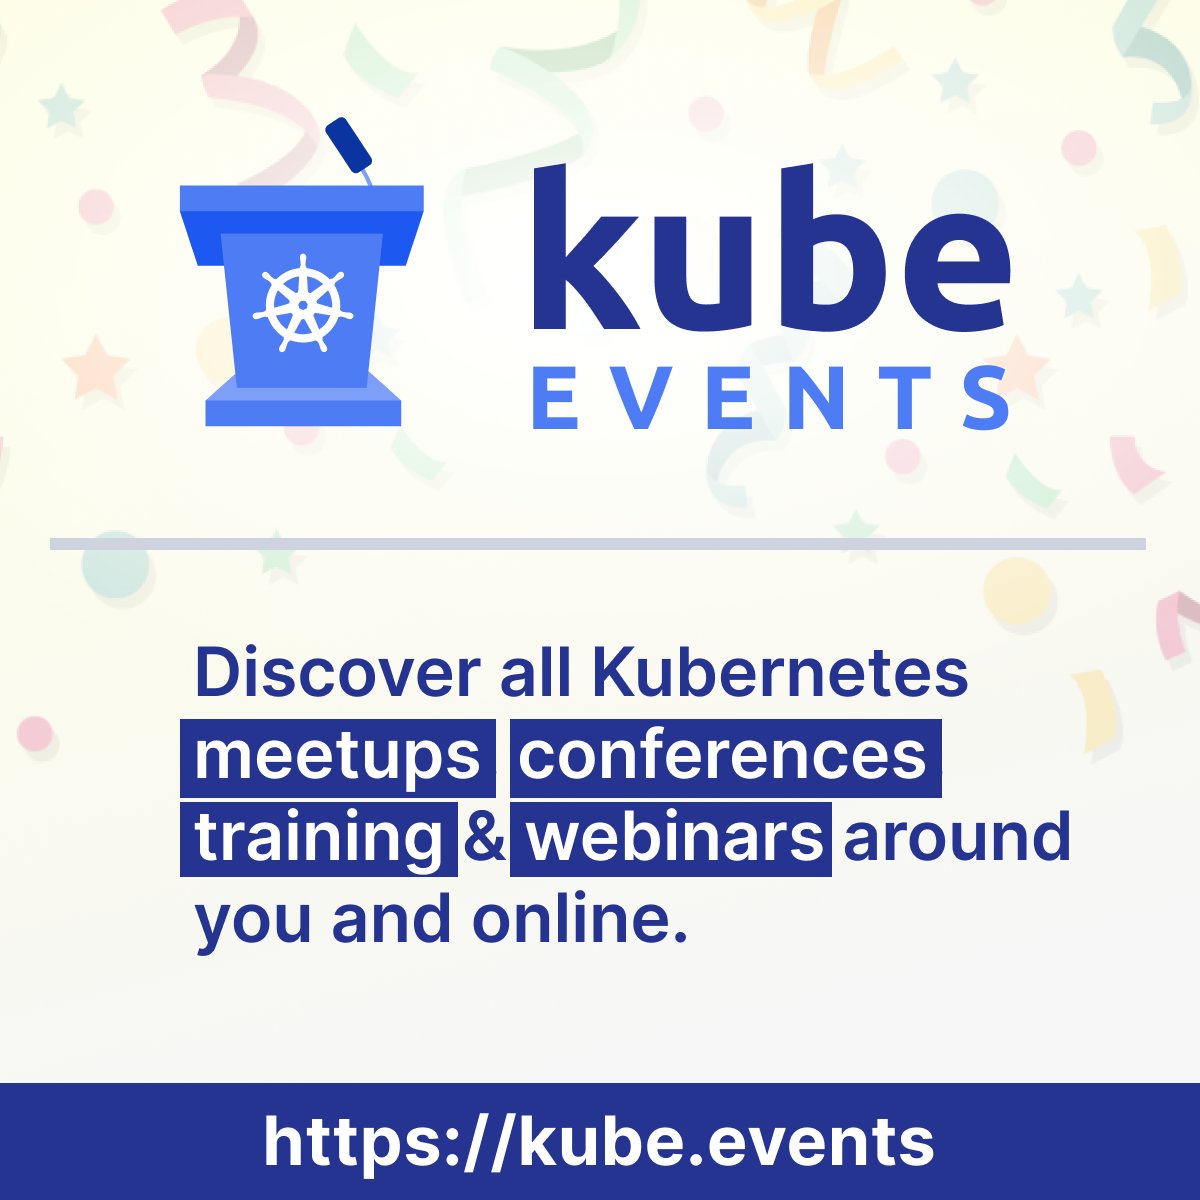 Discovering Kubernetes meetups, conferences, workshops, & webinars has become much easier! ① You can subscribe to the Upcoming Kubernetes Events newsletter and receive a weekly digest ② @K8sEvents lists discounts and coupons for conferences! → kube.events